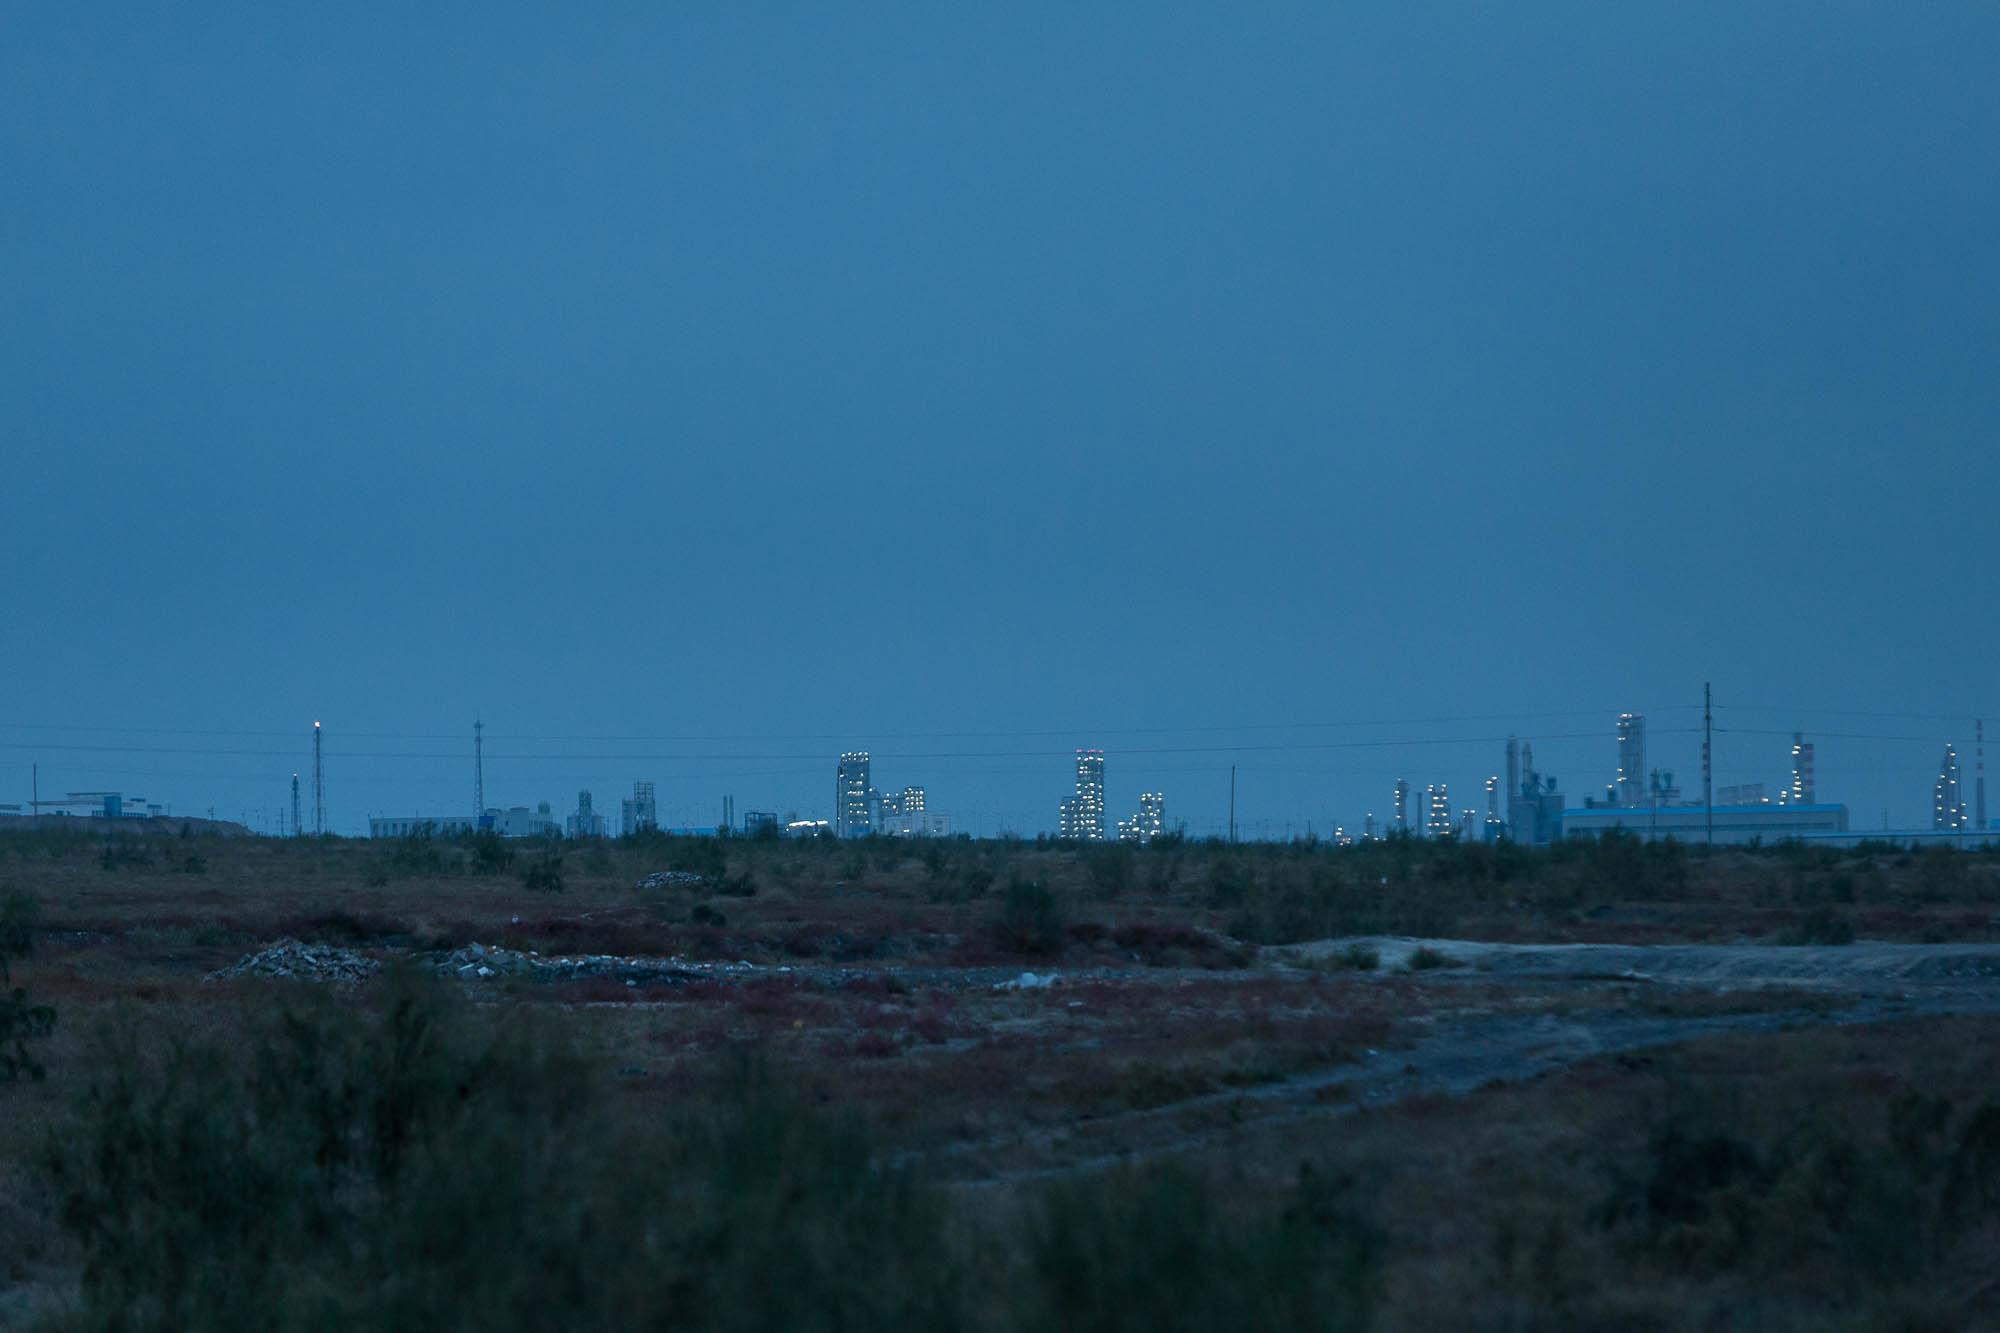 oil refineries in the distance